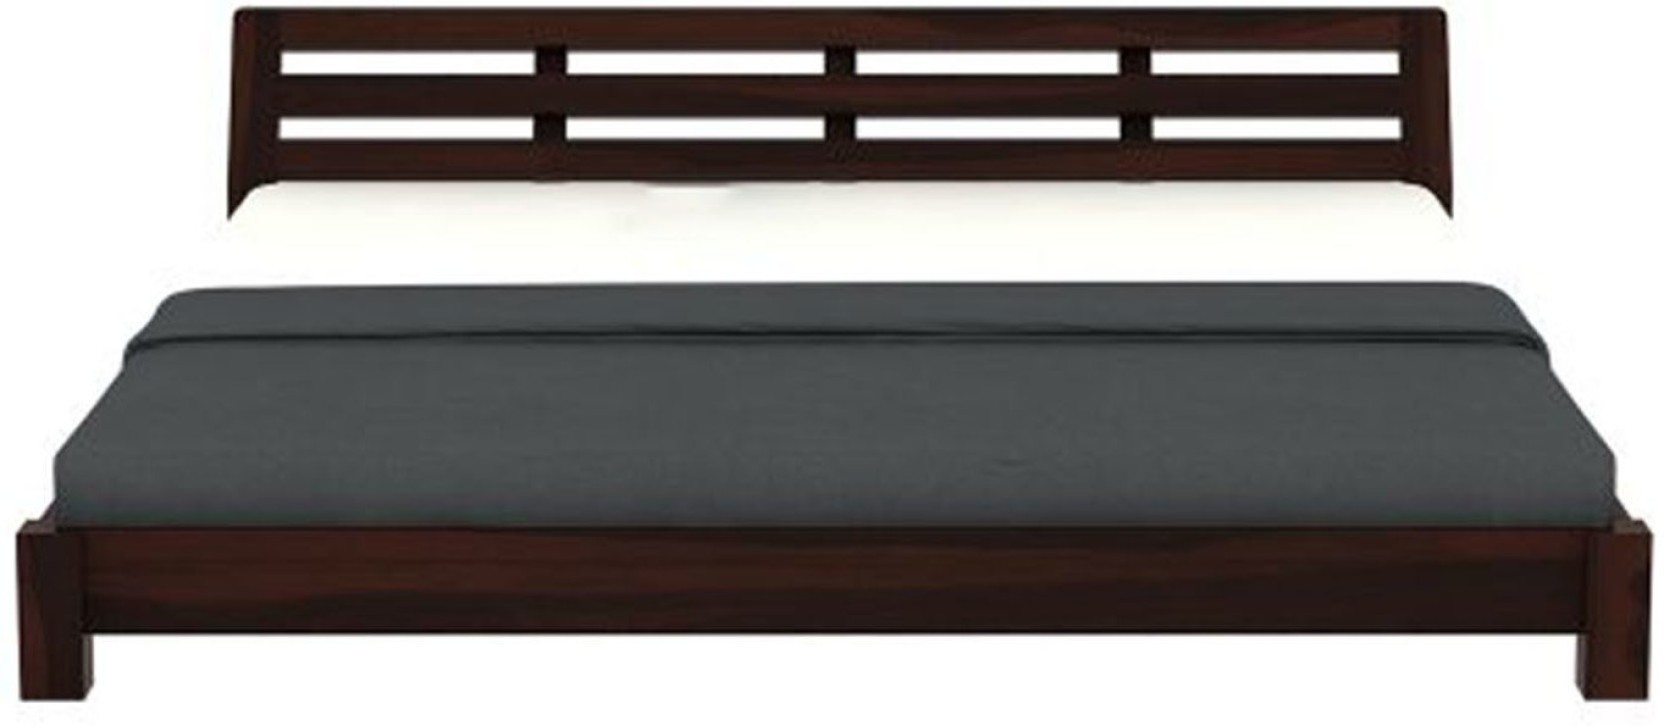 Aaram By Zebrs Sheesham Wood Bed Without Storage Solid Wood King Bed (Finish Color - Walnut, Delivery Condition - DIY(Do-It-Yourself))